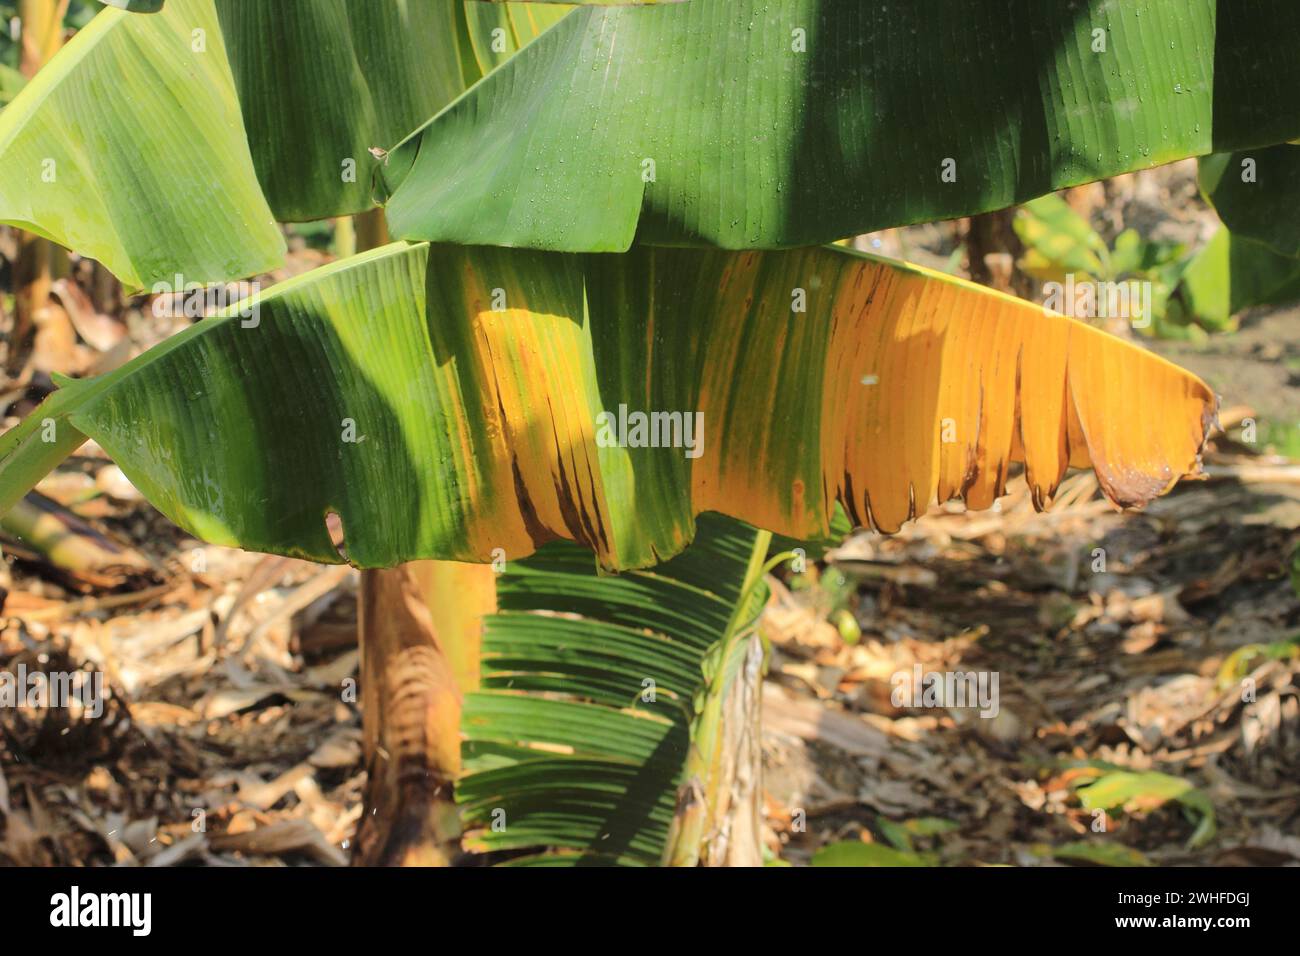 banana plant affected by deadly Fusarium wilt disease Tropical Race 4 fungus Stock Photo